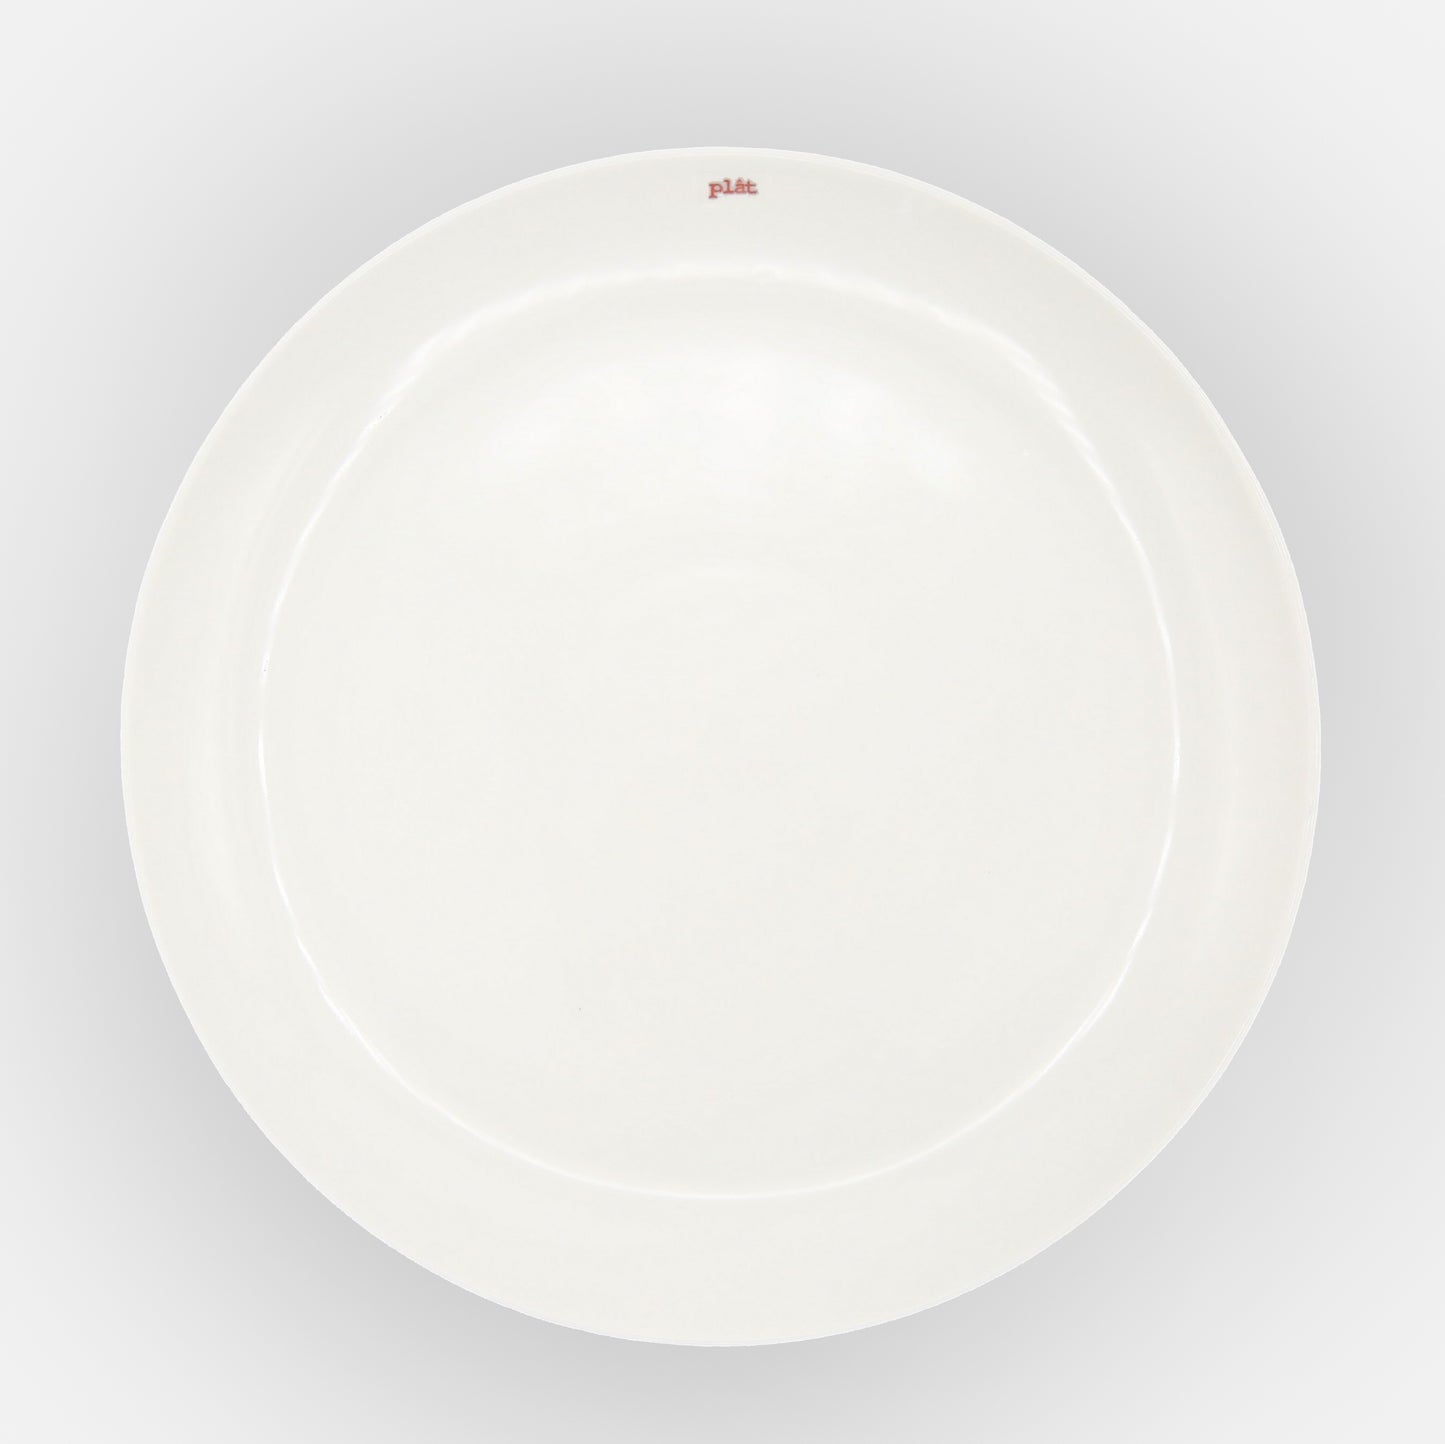 Set of 2 'Plat' Dinner Plates by Keith Brymer Jones